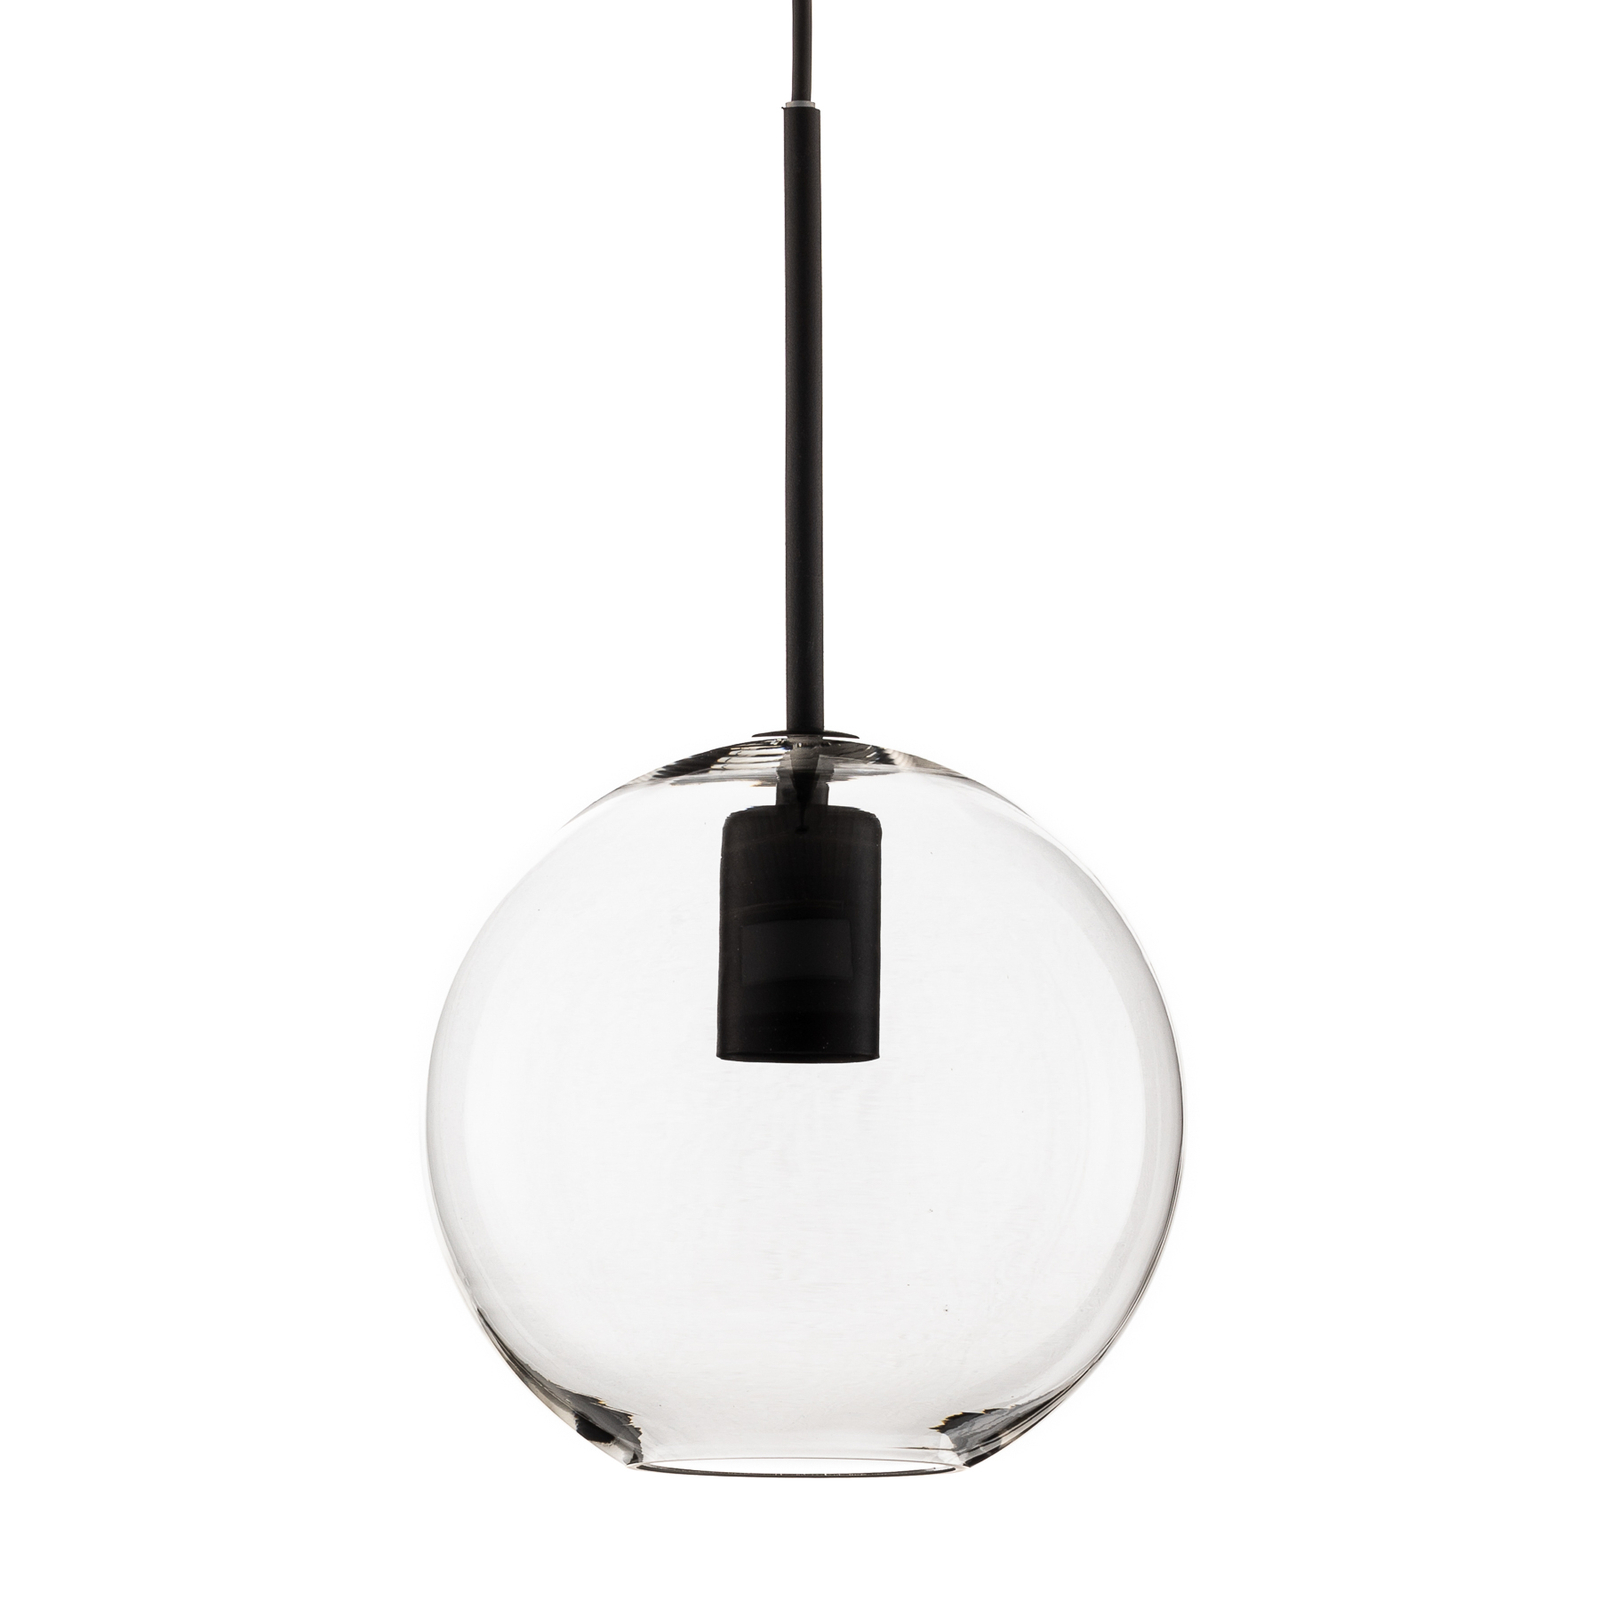 Sphere M pendant light with glass shade